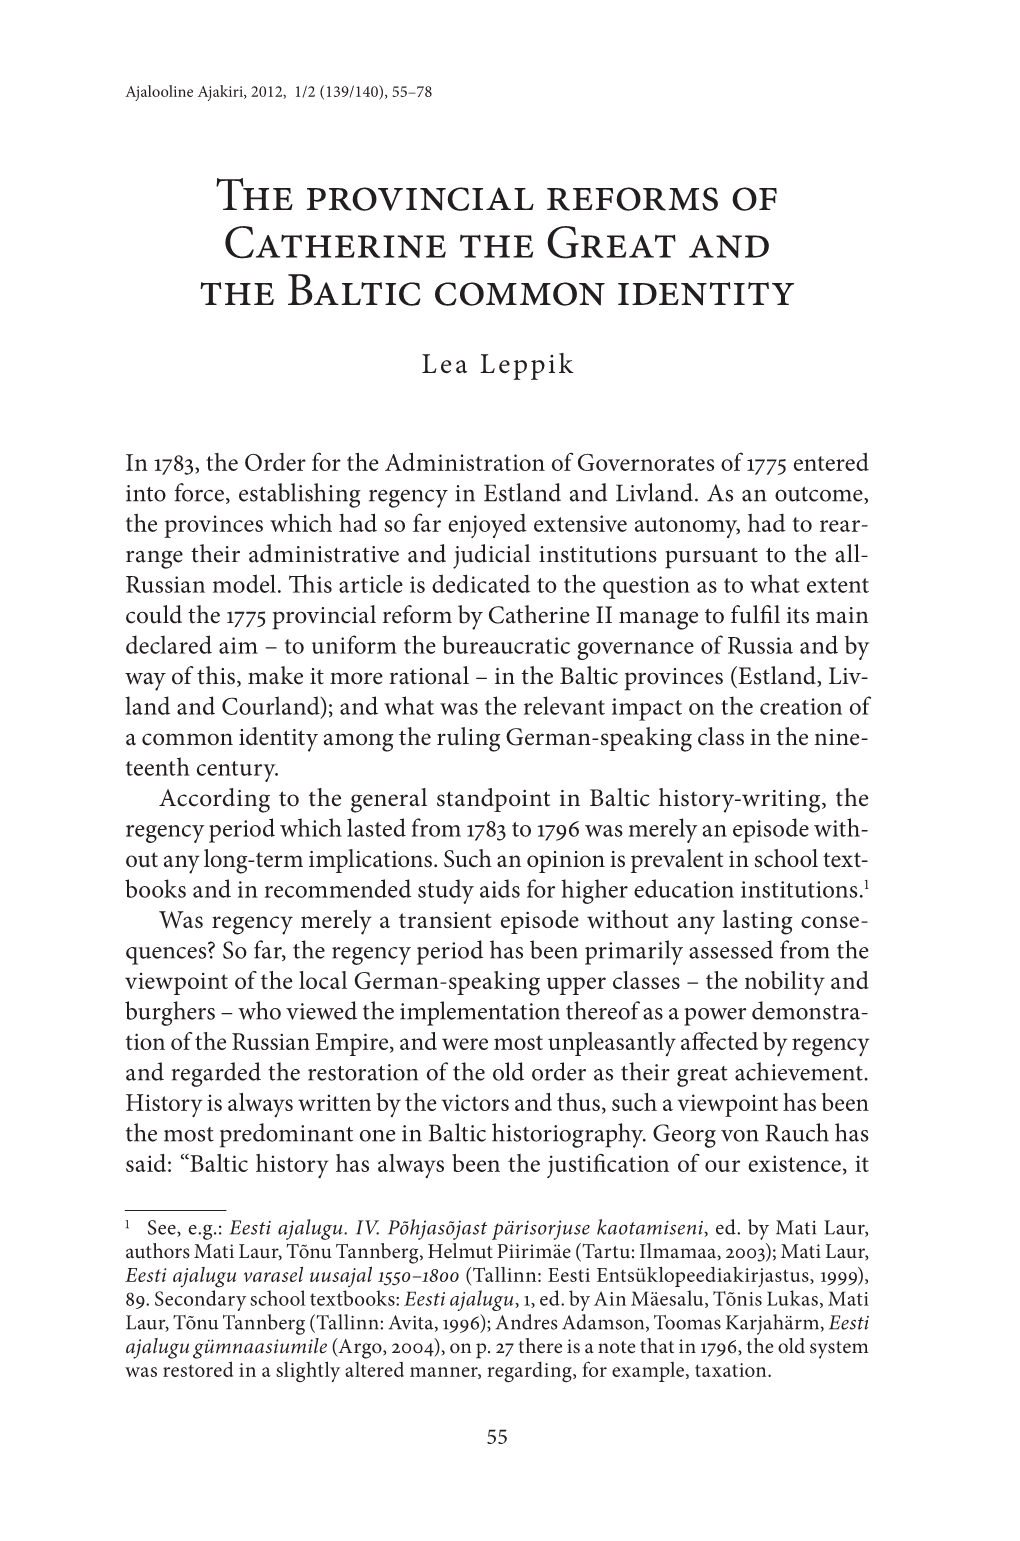 The Provincial Reforms of Catherine the Great and the Baltic Common Identity